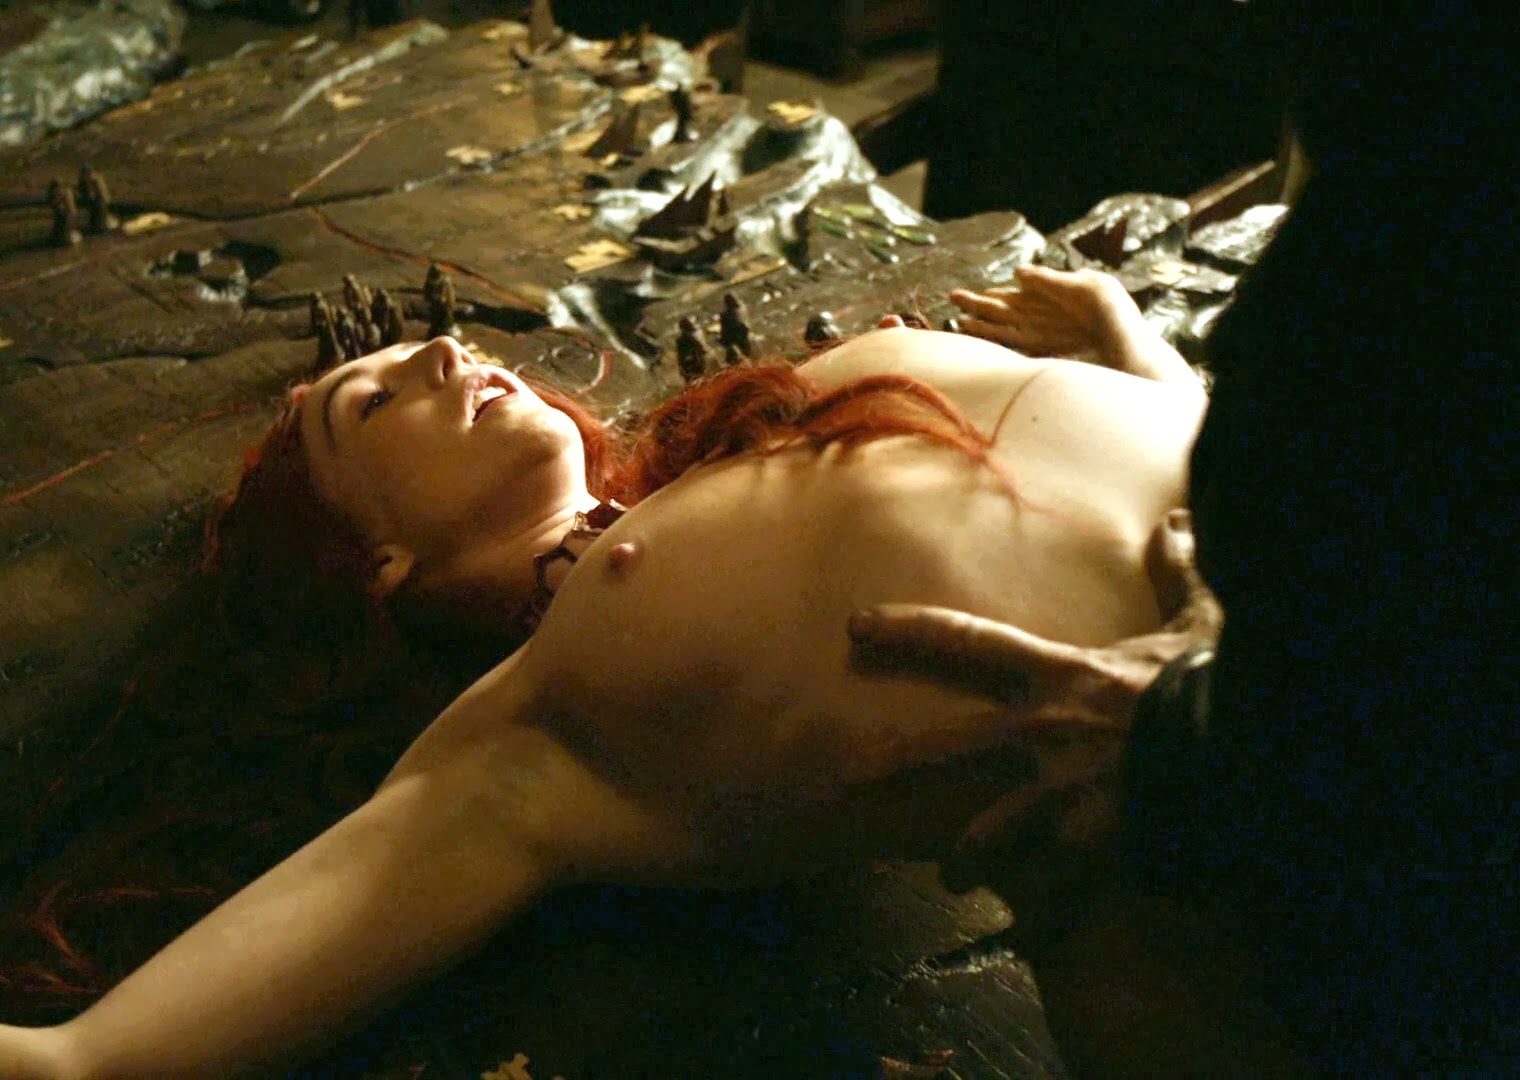 Game Of Thrones Melisandre Nude - Telegraph.